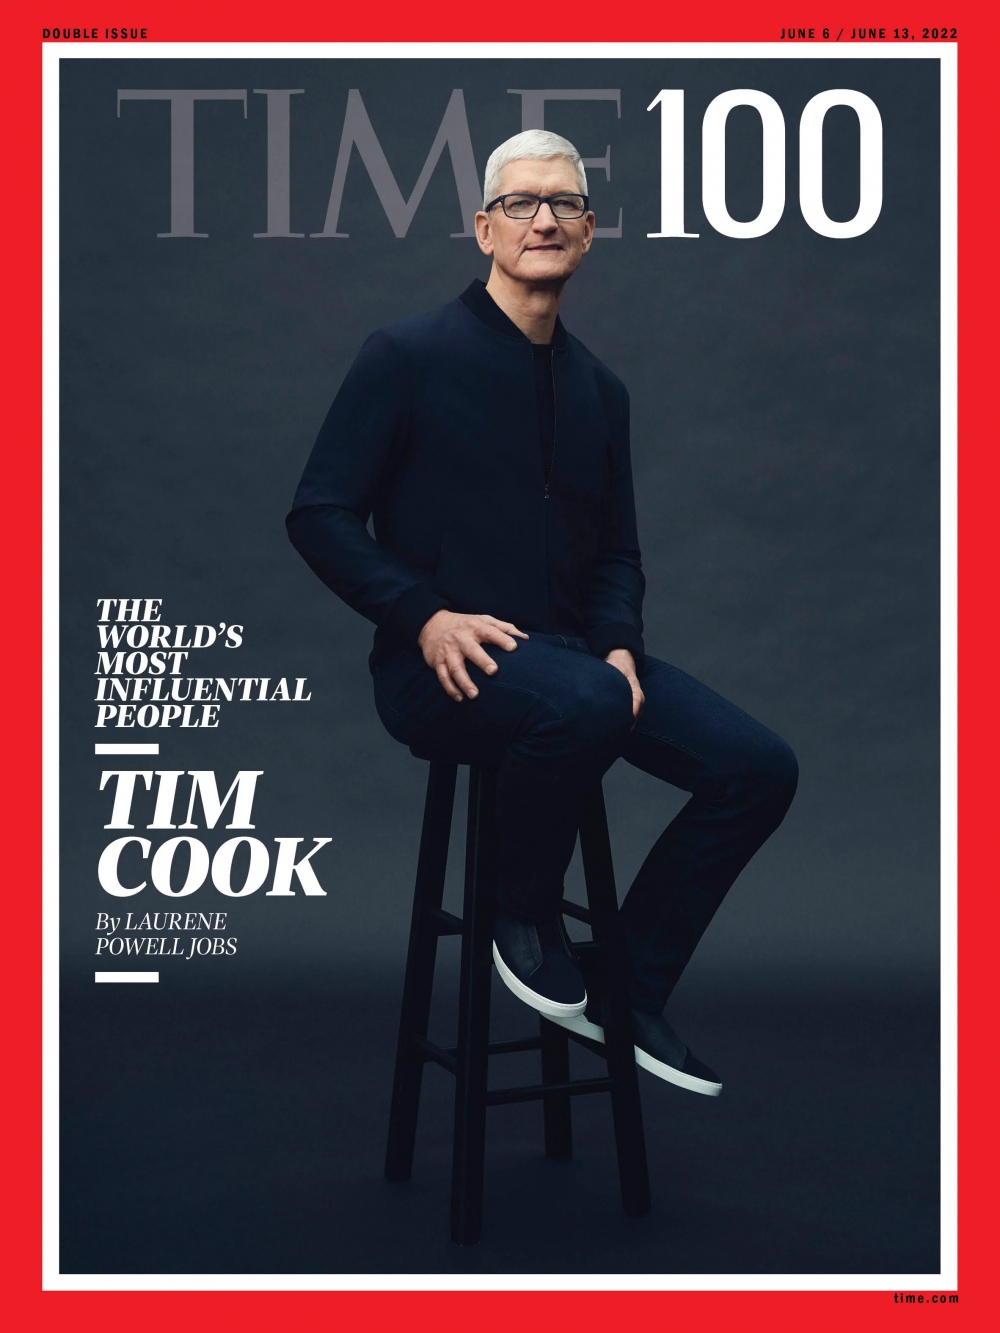 Tim Cook on the cover of Time Magazine